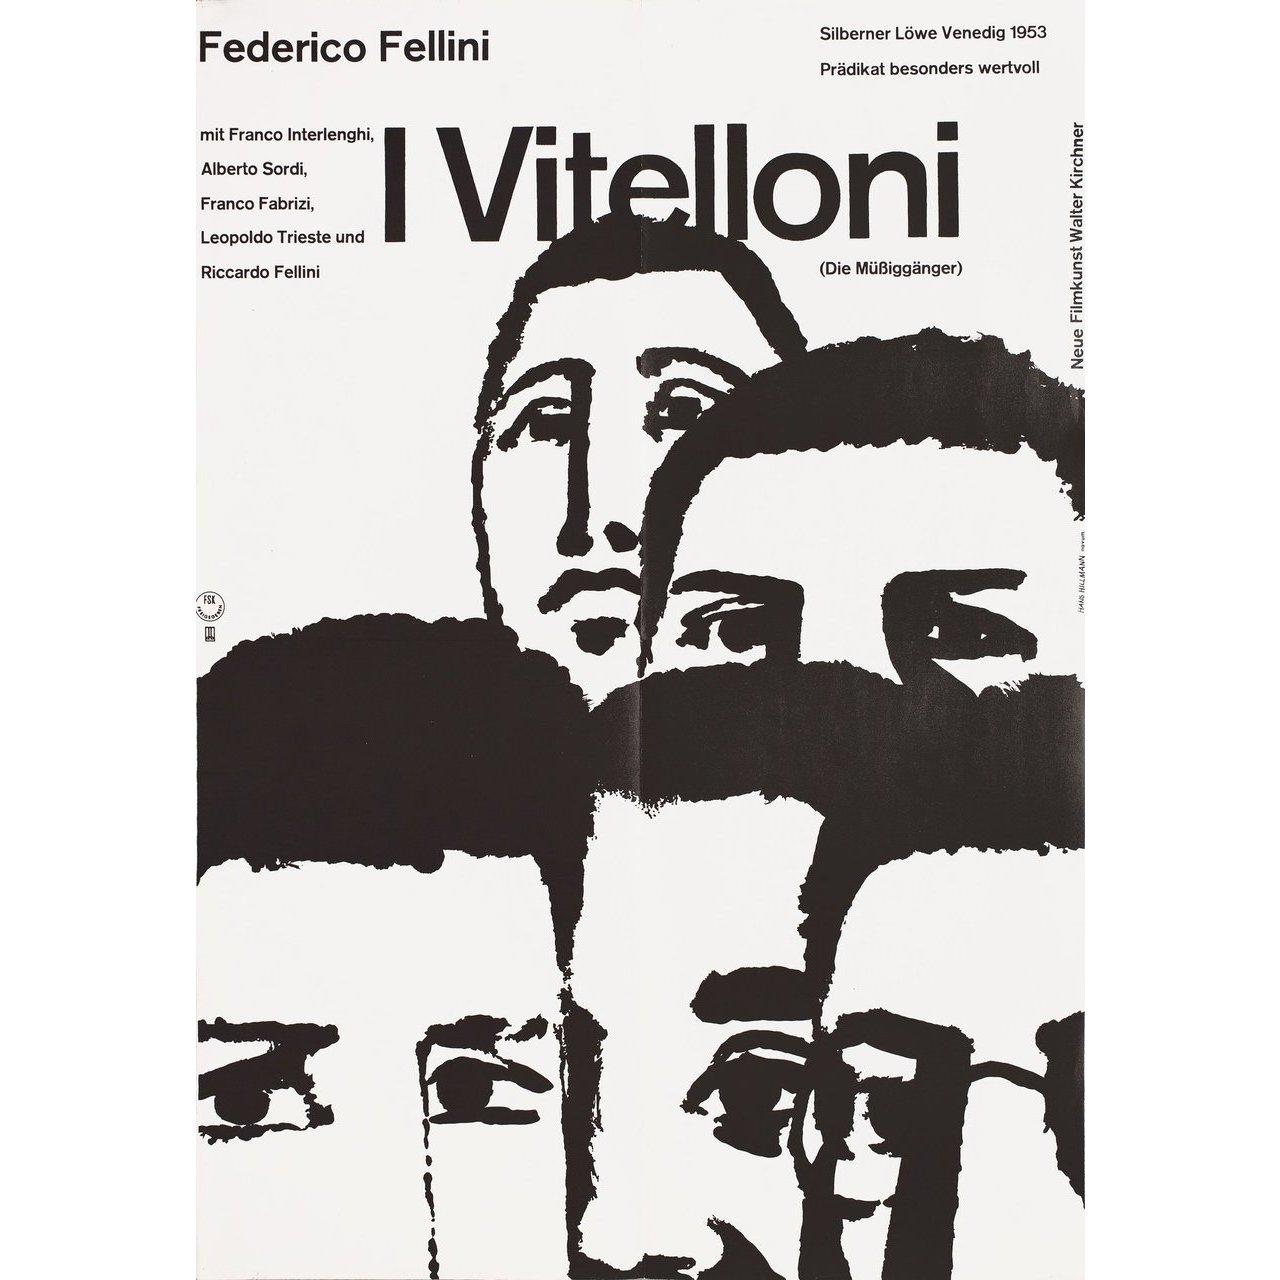 Original 1962 German A2 poster by Hans Hillmann for the 1953 film I Vitelloni (The Young and the Passionate) directed by Federico Fellini with Franco Interlenghi / Alberto Sordi / Franco Fabrizi / Leopoldo Trieste. Fine condition, folded. Many